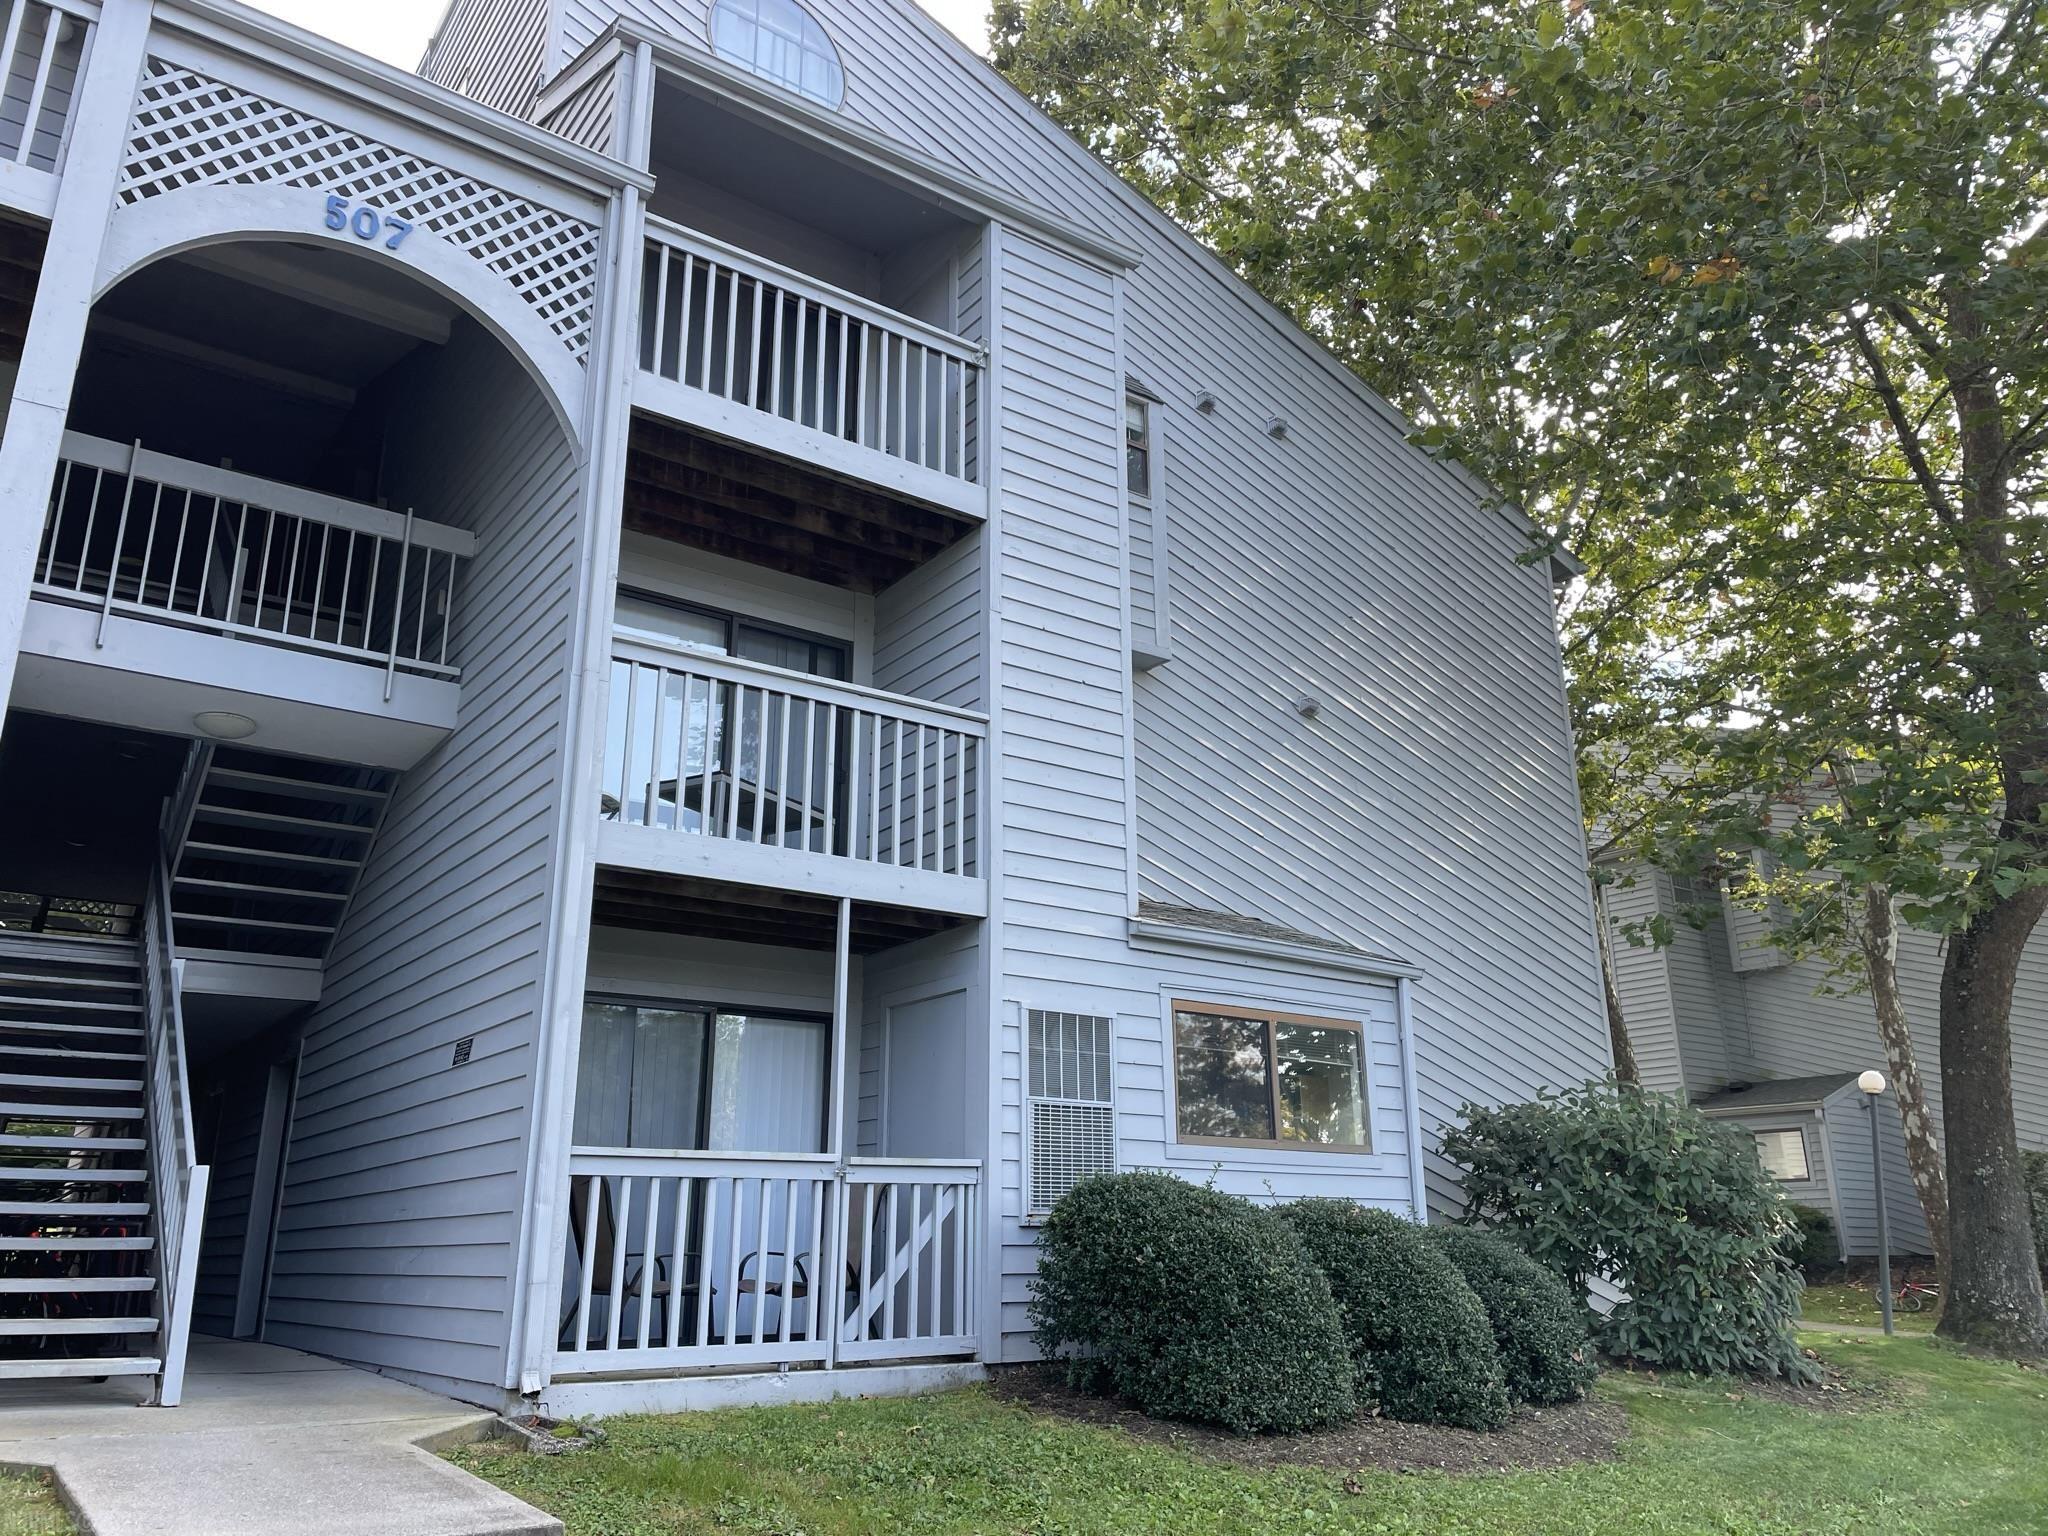 Conveniently located near Virginia Tech, shopping, and dining, this 3-bed, 2-bath condo in Sundance Ridge offers spacious, modern living. The open main level features two bedrooms and two bathrooms, while a loft serves as a third bedroom or flexible space. Enjoy community amenities, making it perfect for students, faculty, or anyone seeking a vibrant, well-located home. Schedule a viewing today!